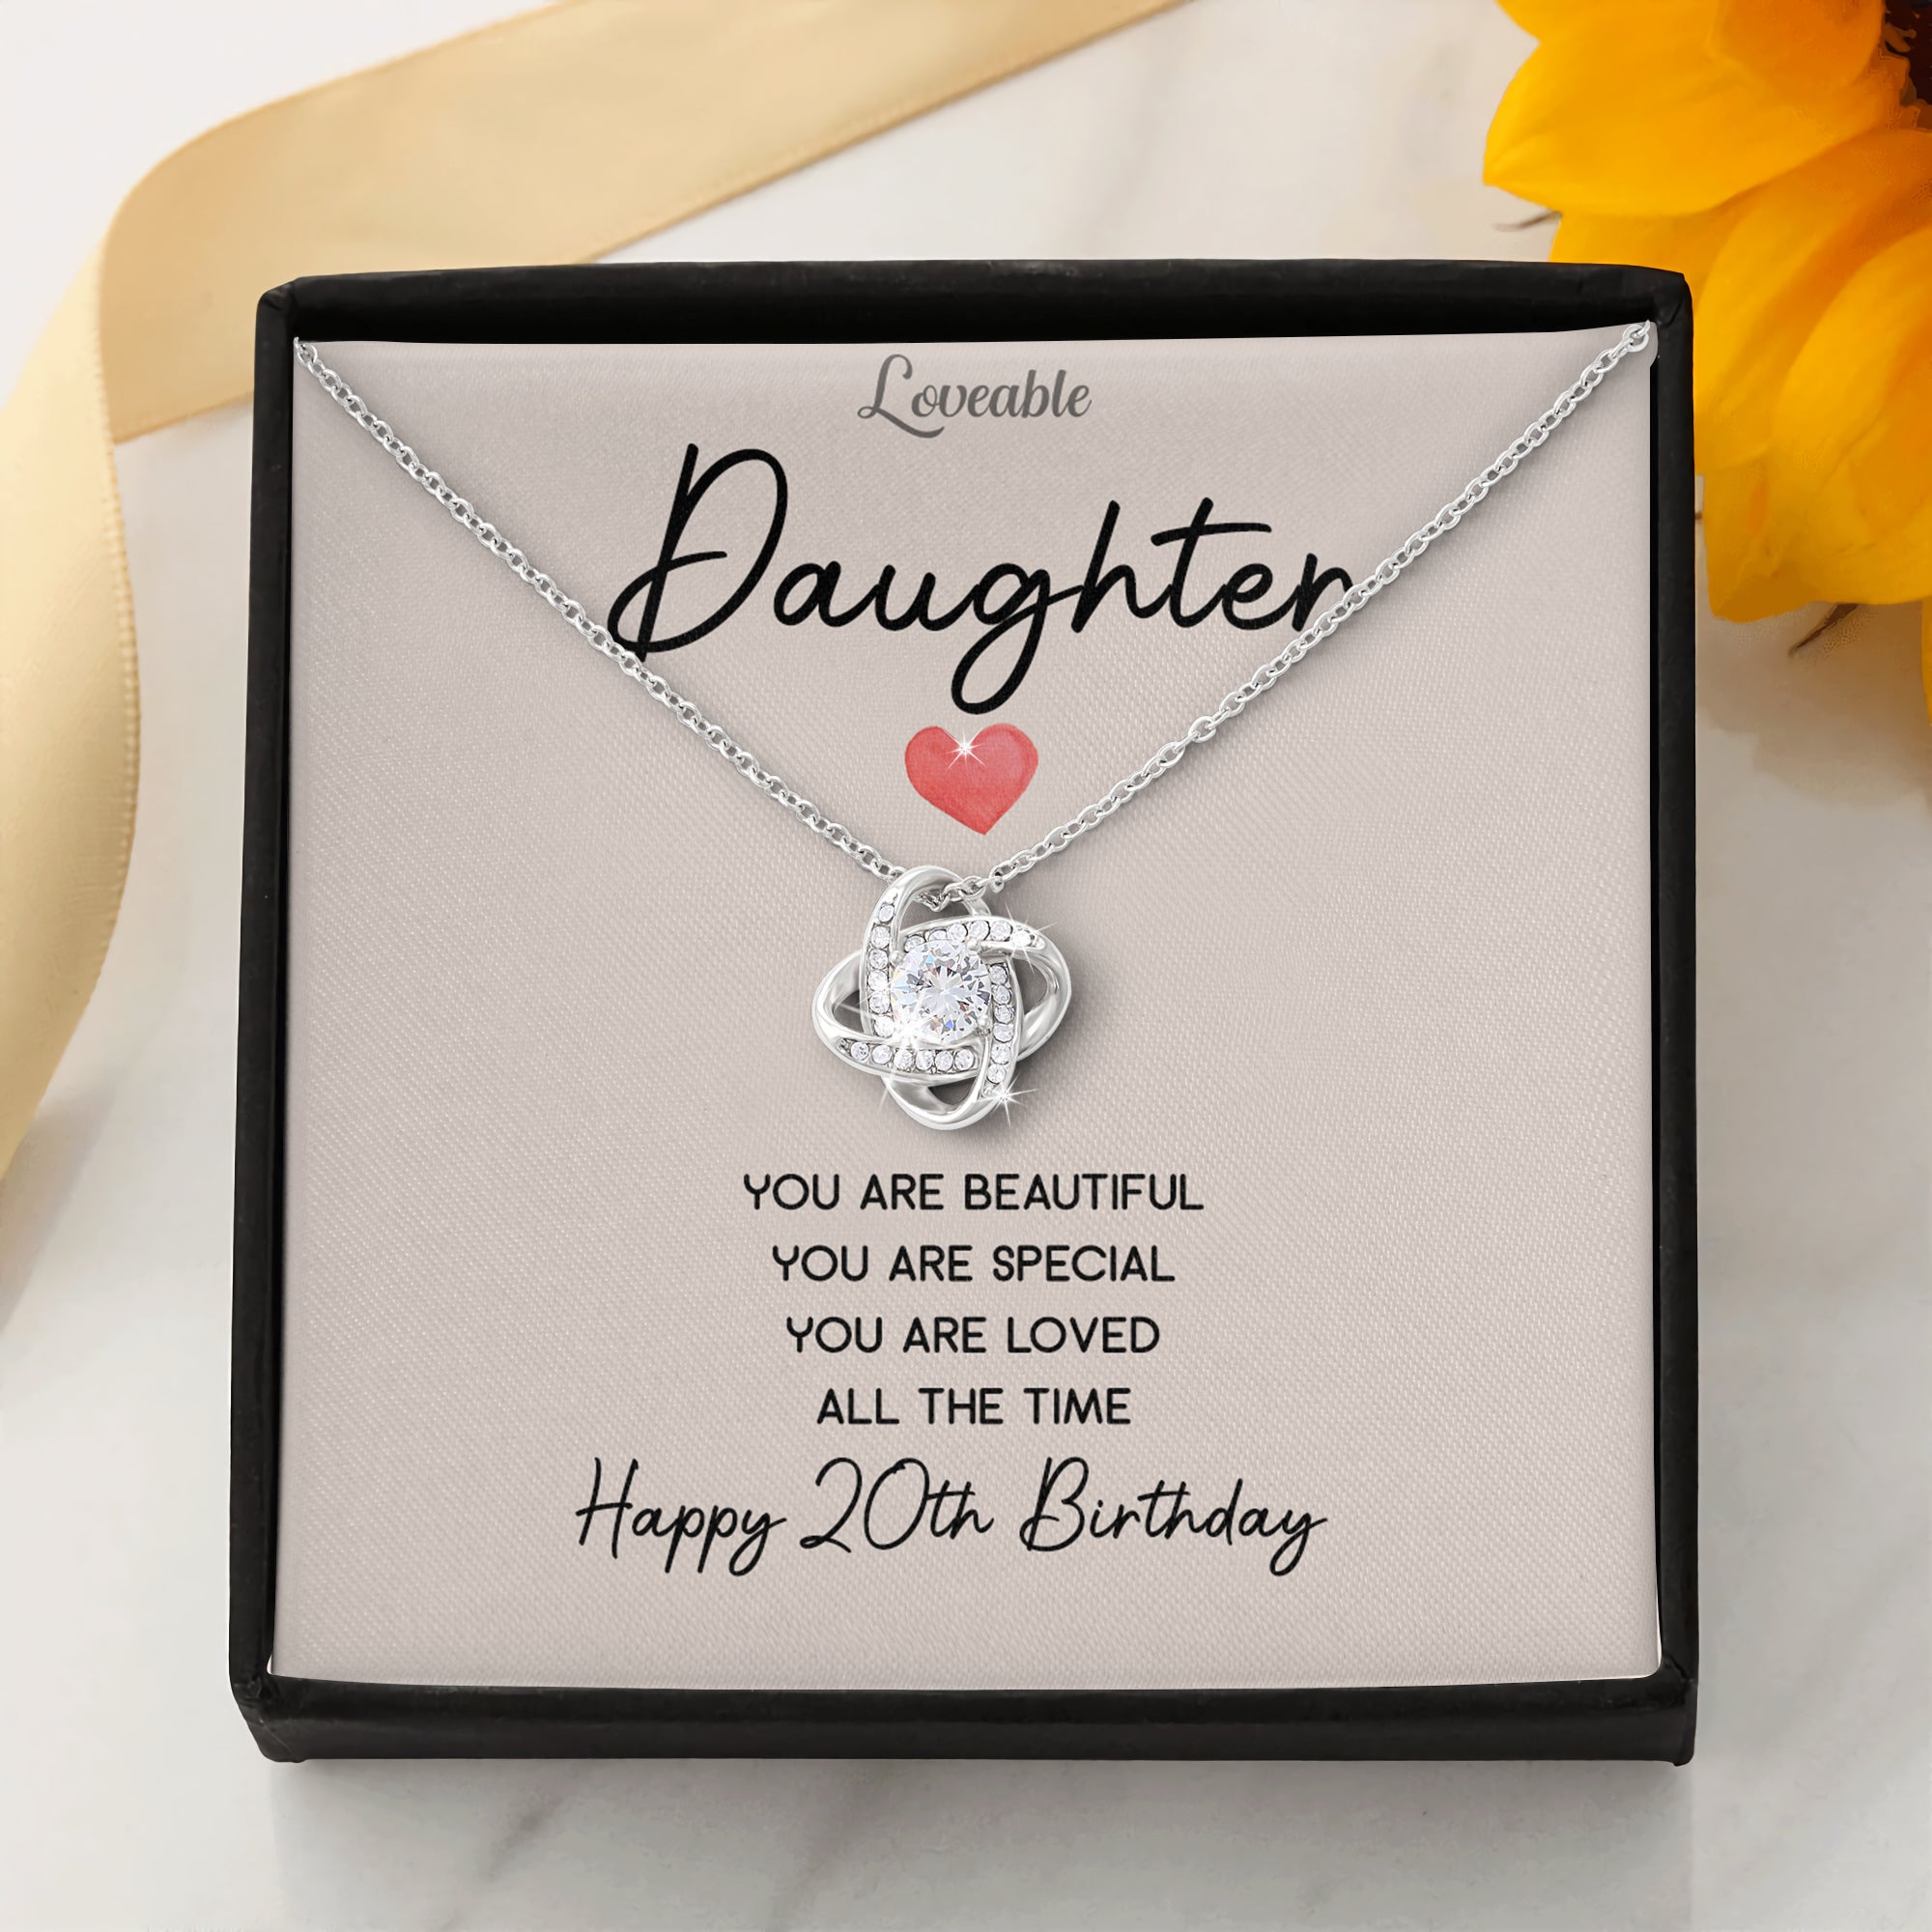 Happy 20th Birthday Gift for Daughter - Meaningful Necklace w/ Message Card